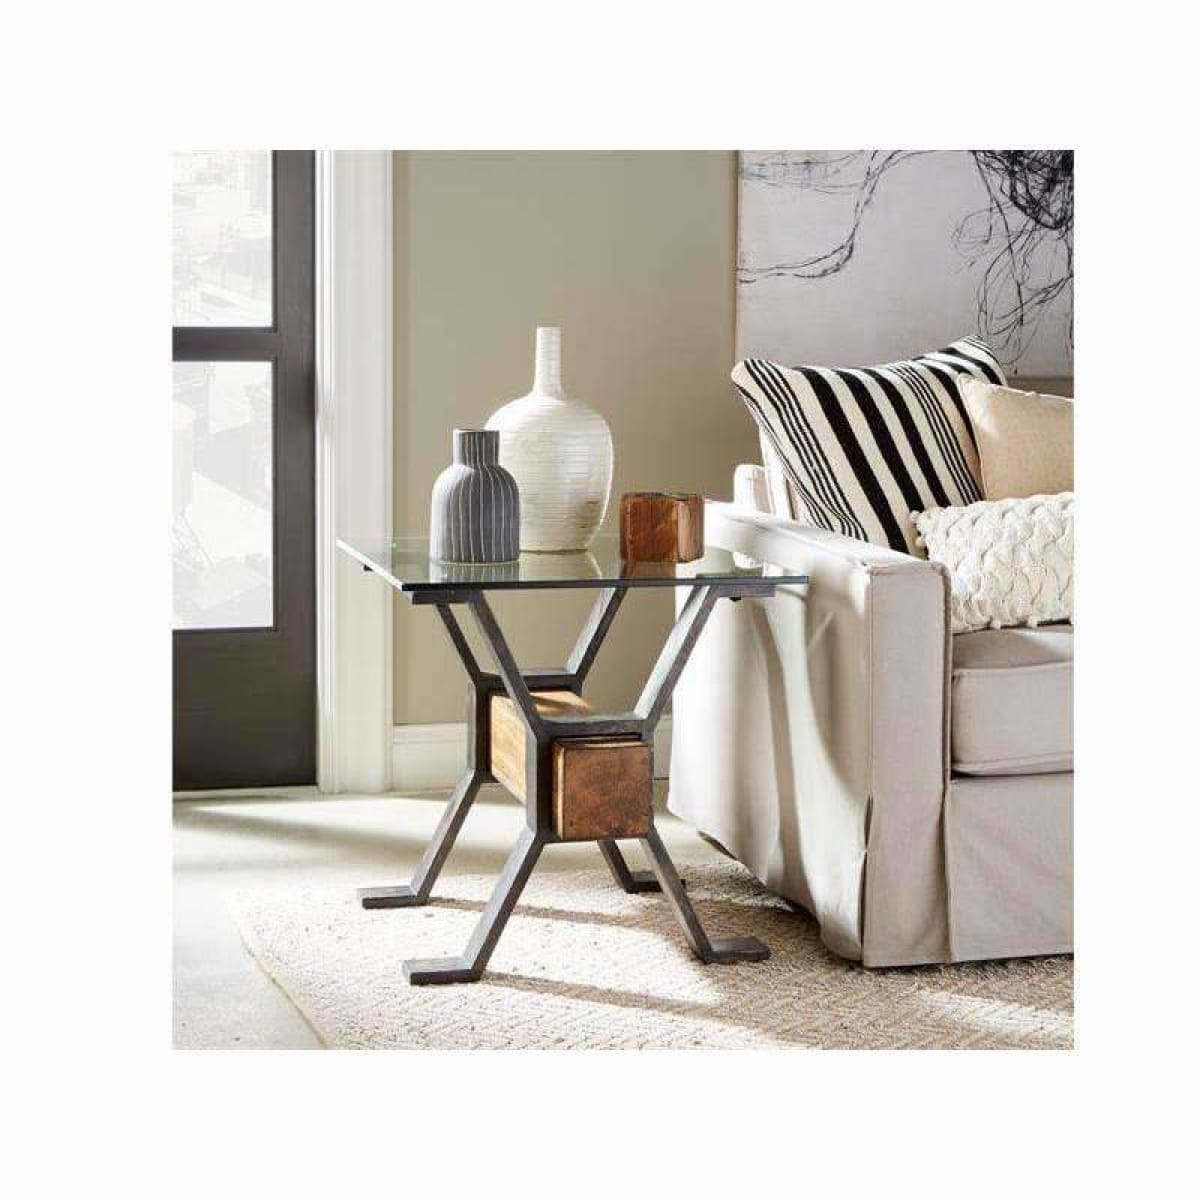 Sawyer Rectangular End Table - END TABLE/SIDE TABLE